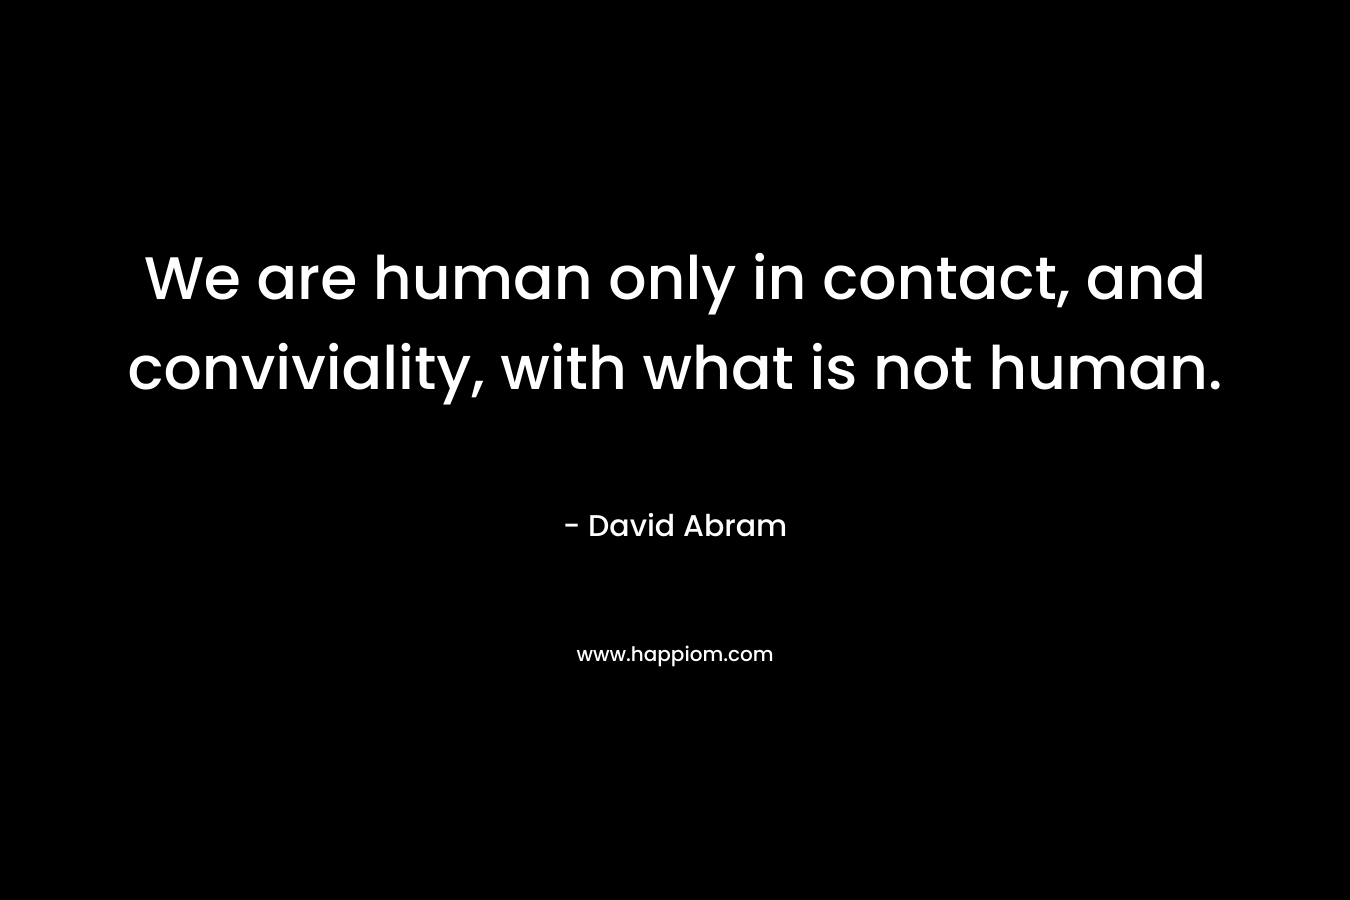 We are human only in contact, and conviviality, with what is not human. – David Abram